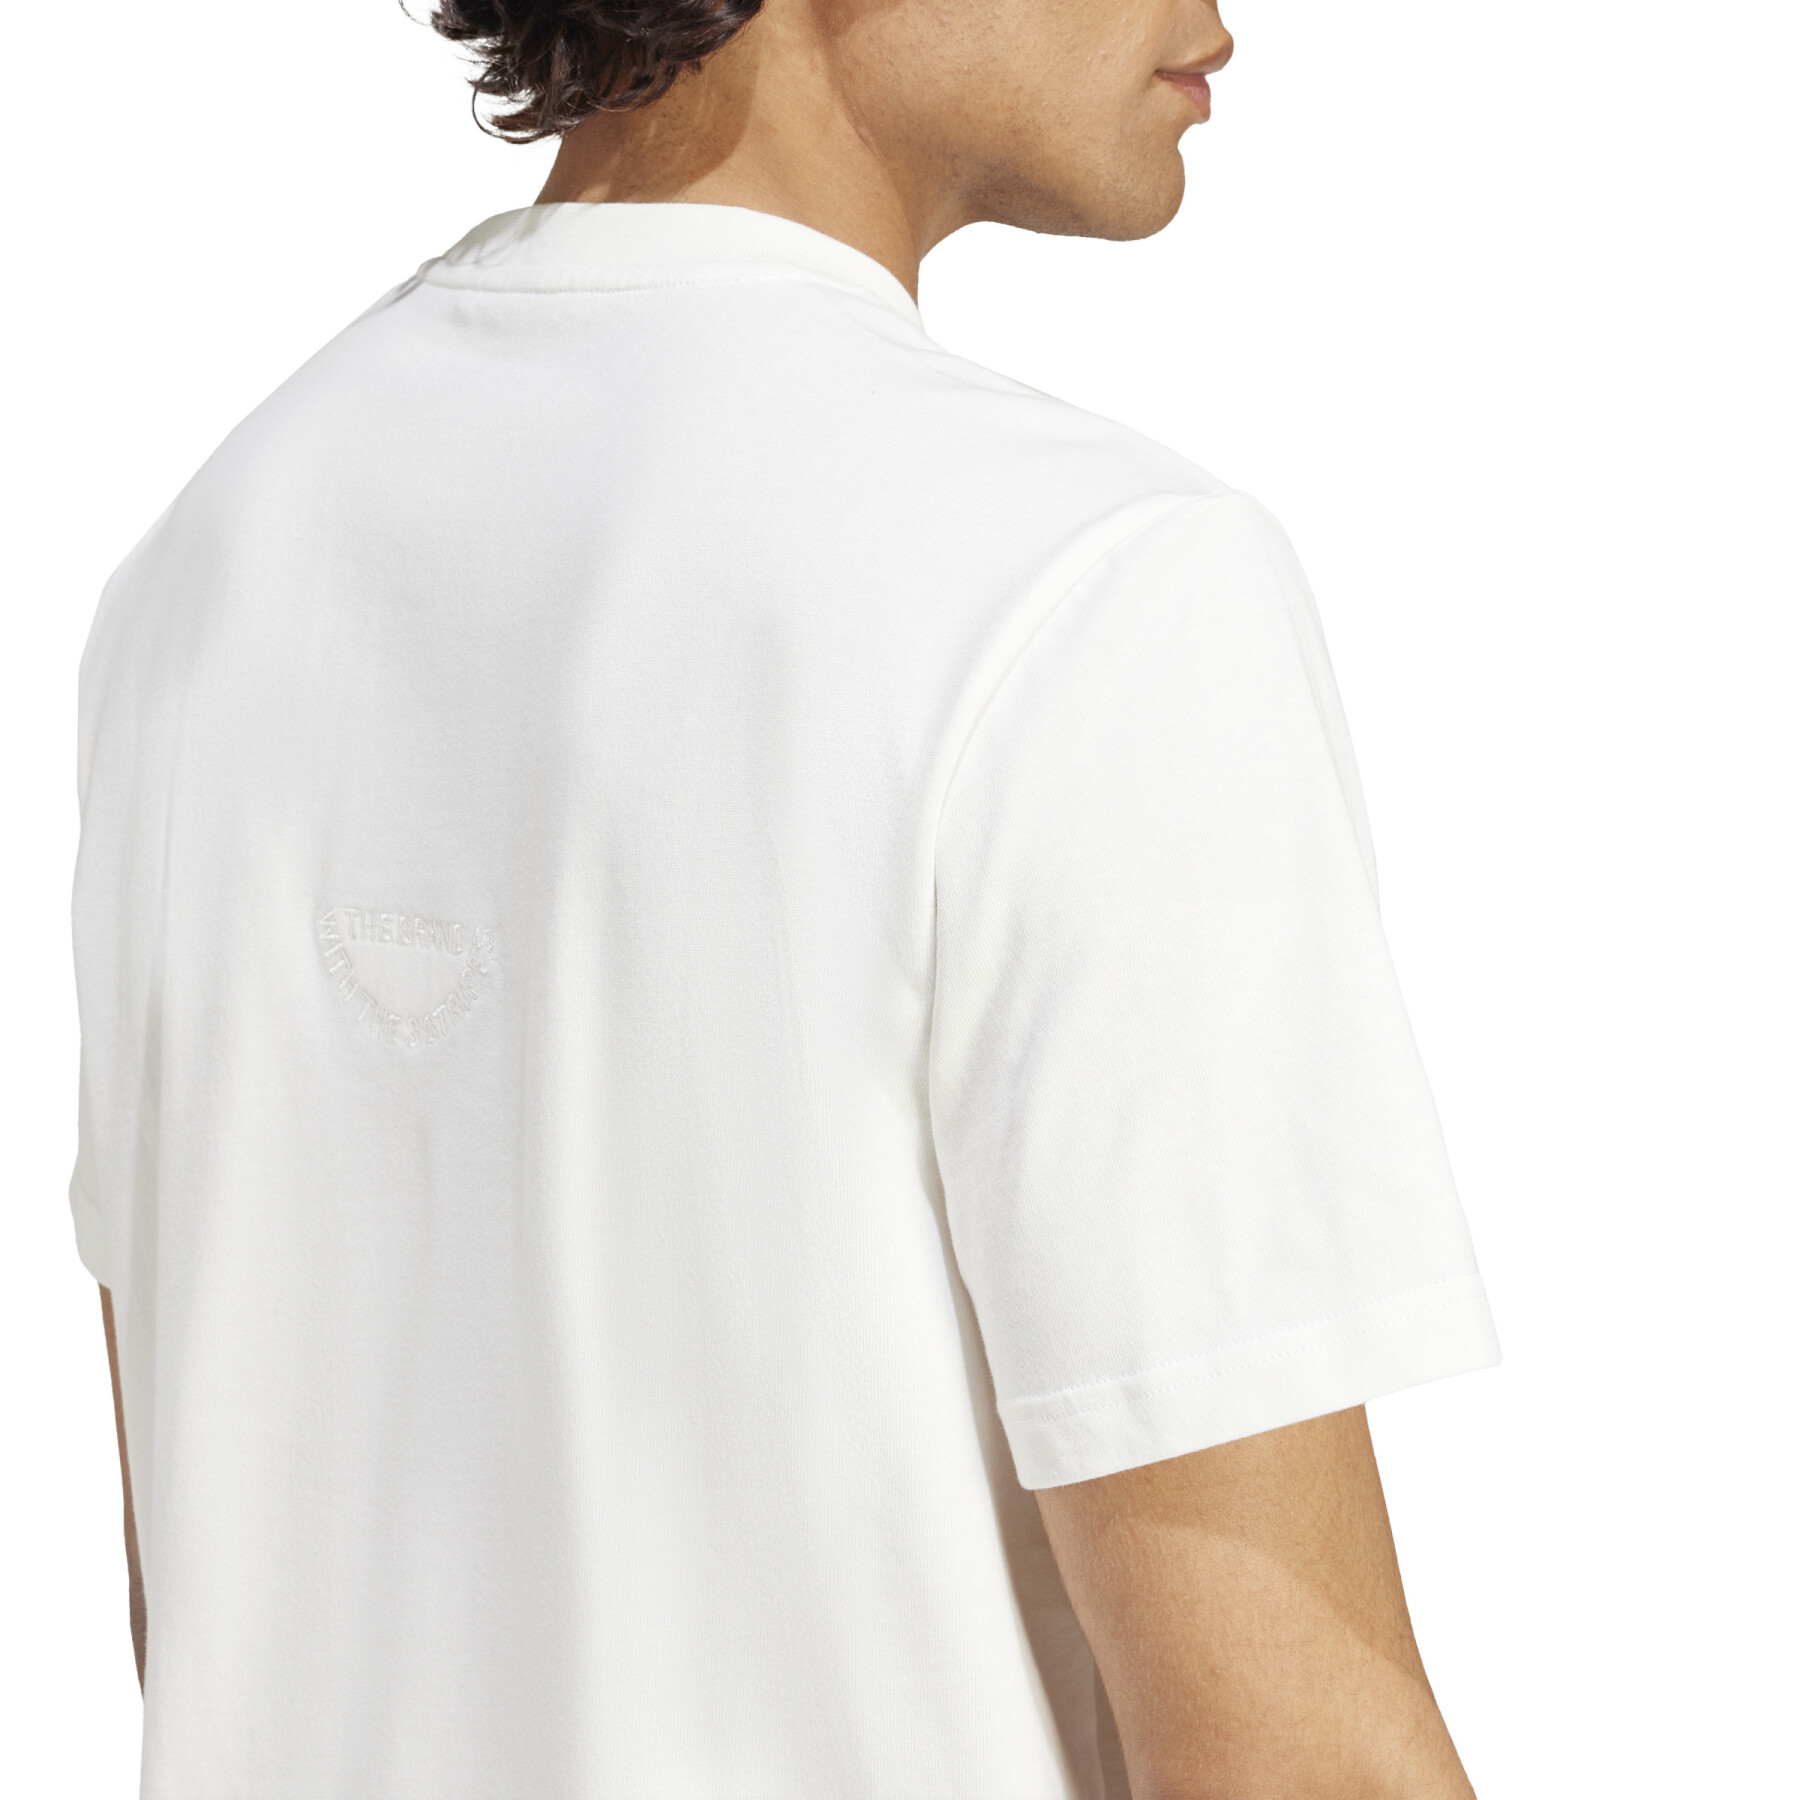 Embroidered T-shirt adidas